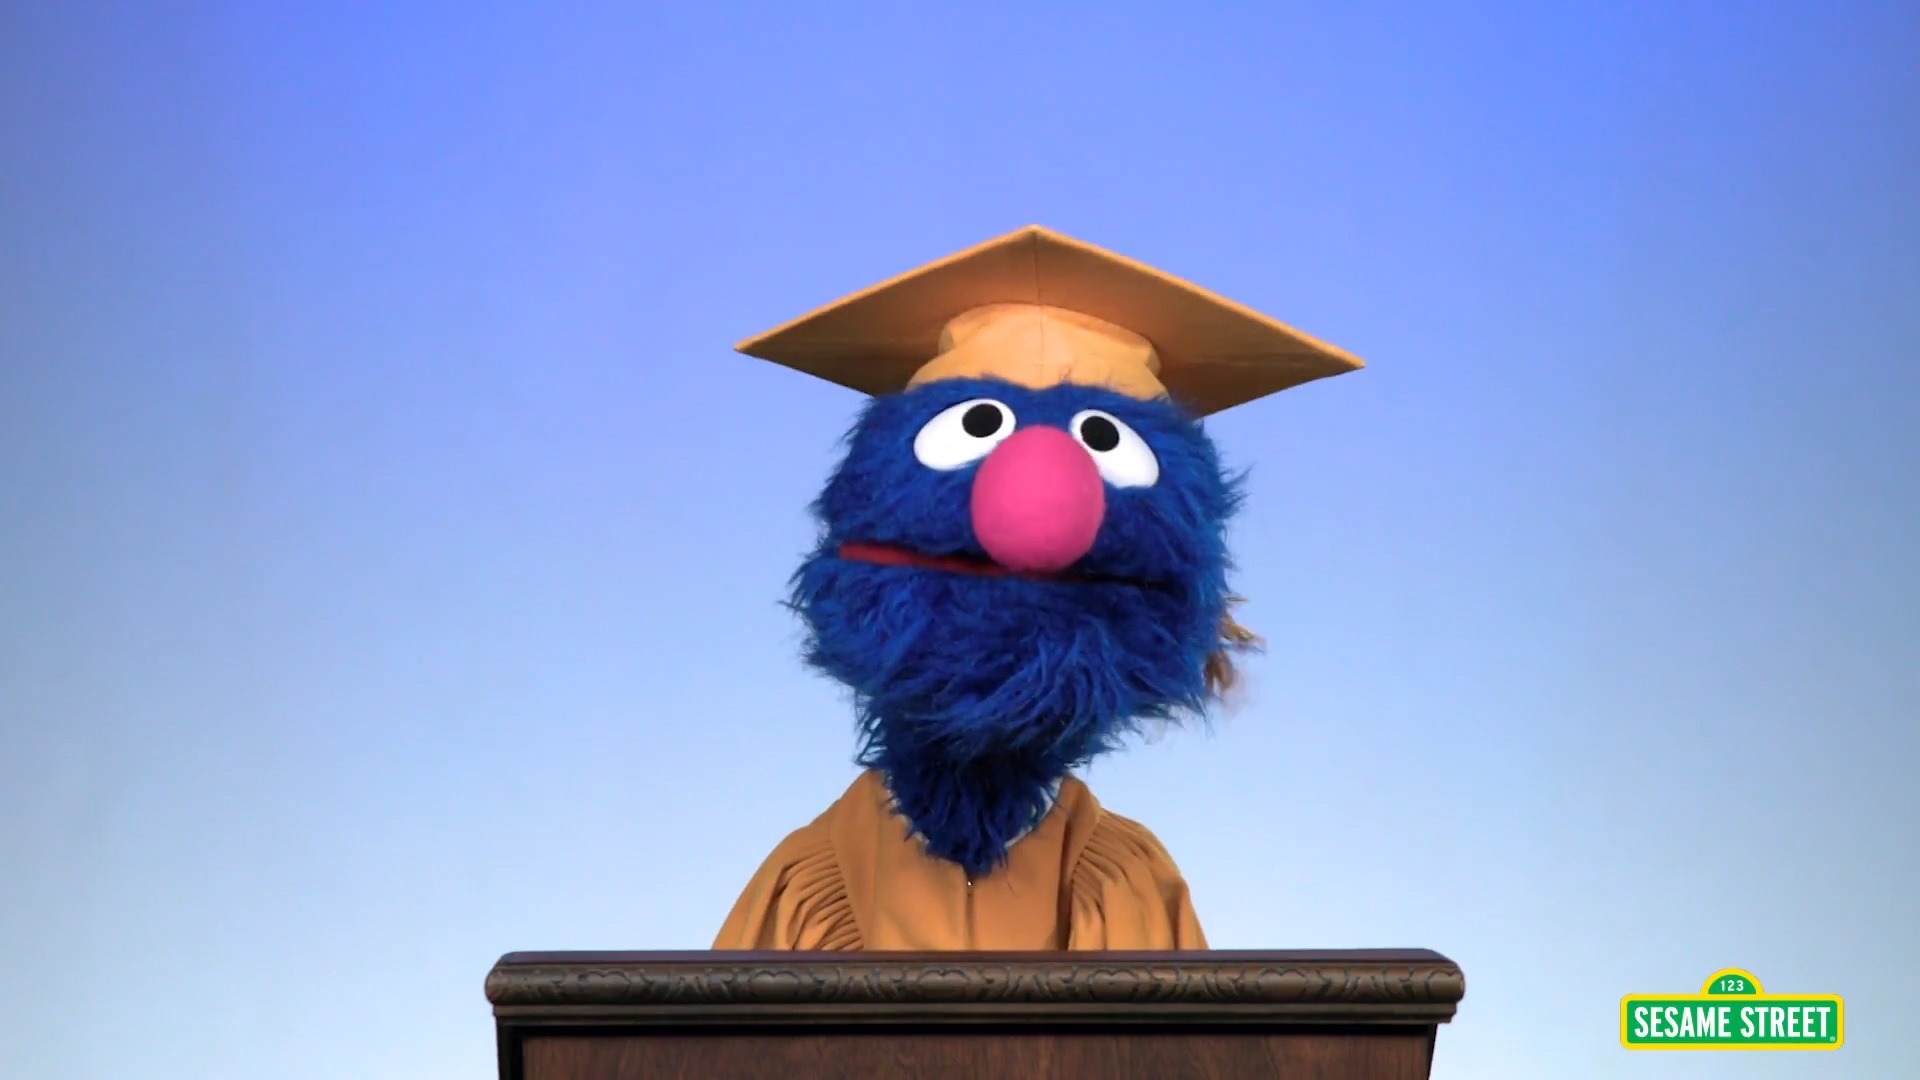 Check Out Grover's Commencement Speech To The Graduating Class Of 2018...